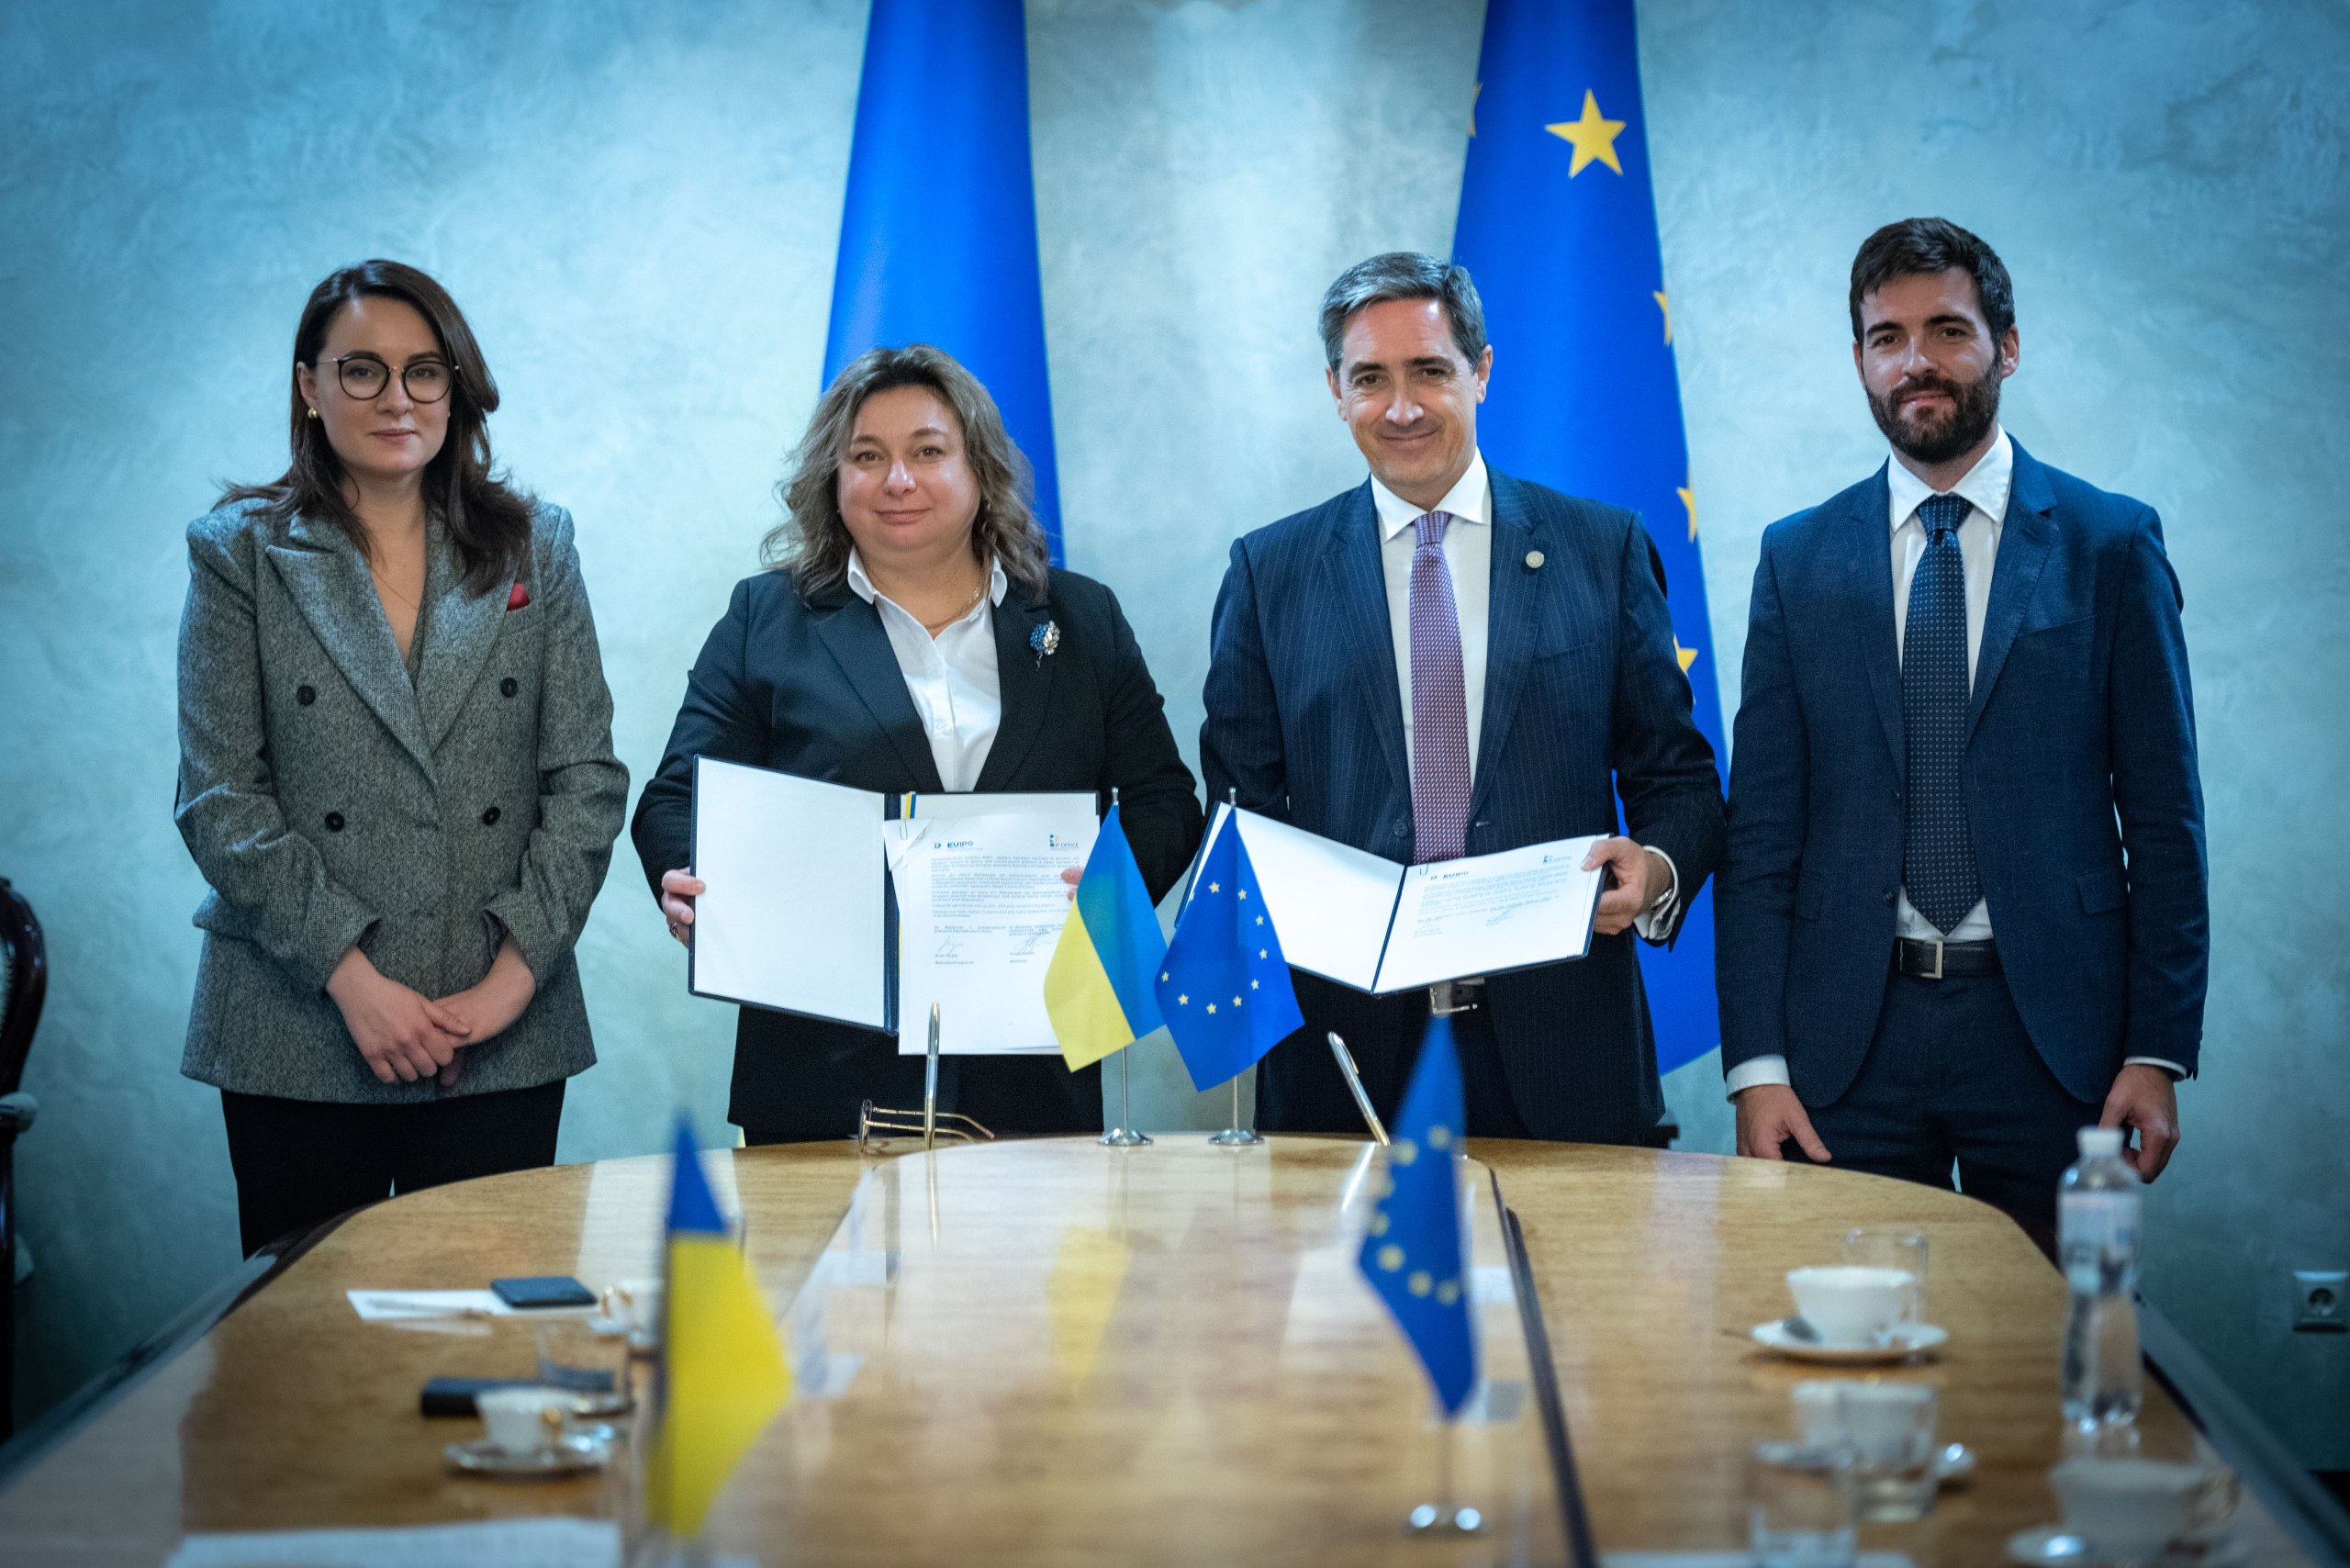 EU and Ukraine agree on support for Ukraine’s integration into the EU intellectual property system